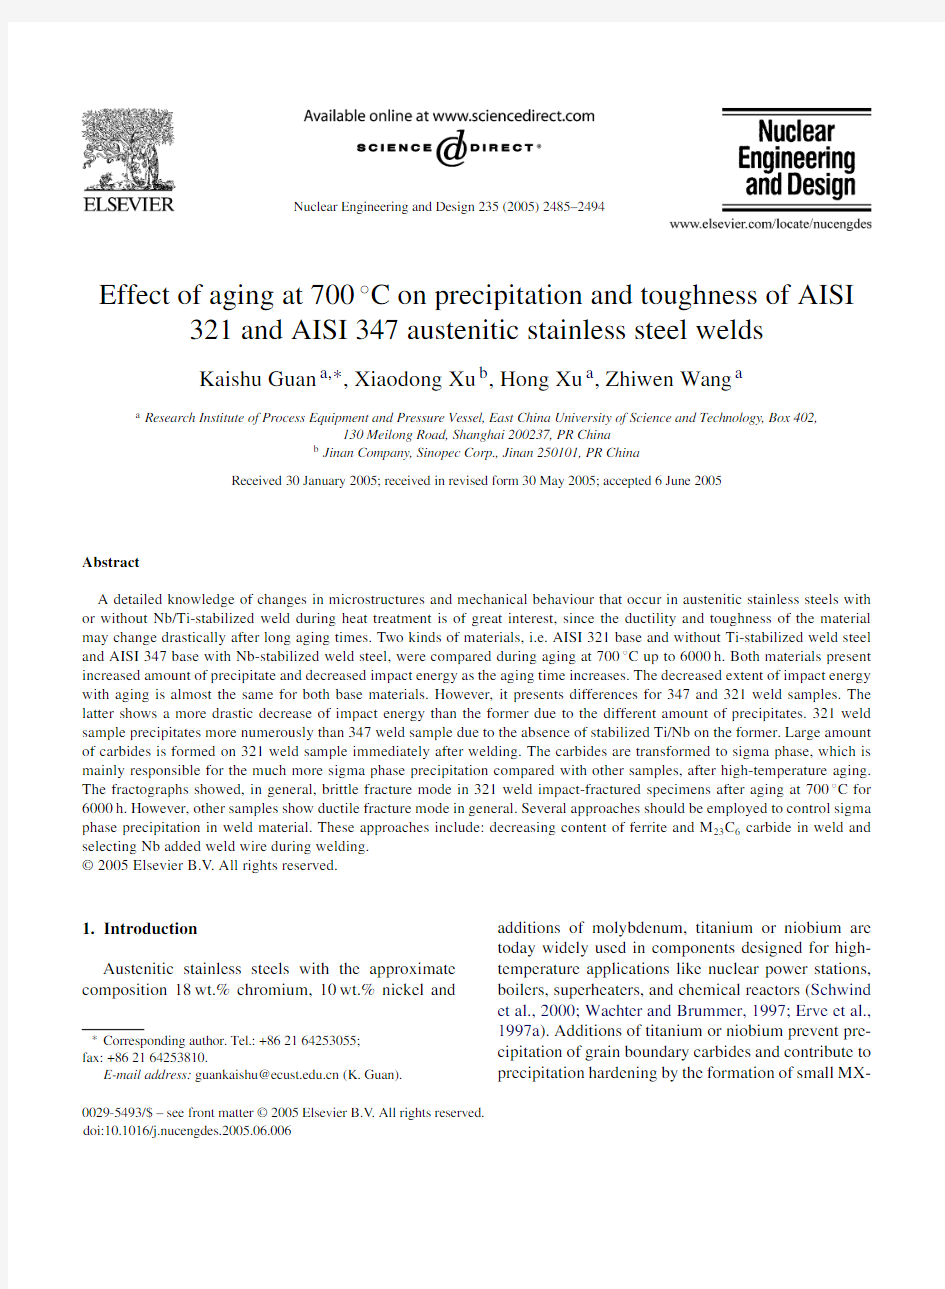 Effect of aging at 700 °C on precipitation and toughness of AISI 321 and AISI 347 austenitic stainl